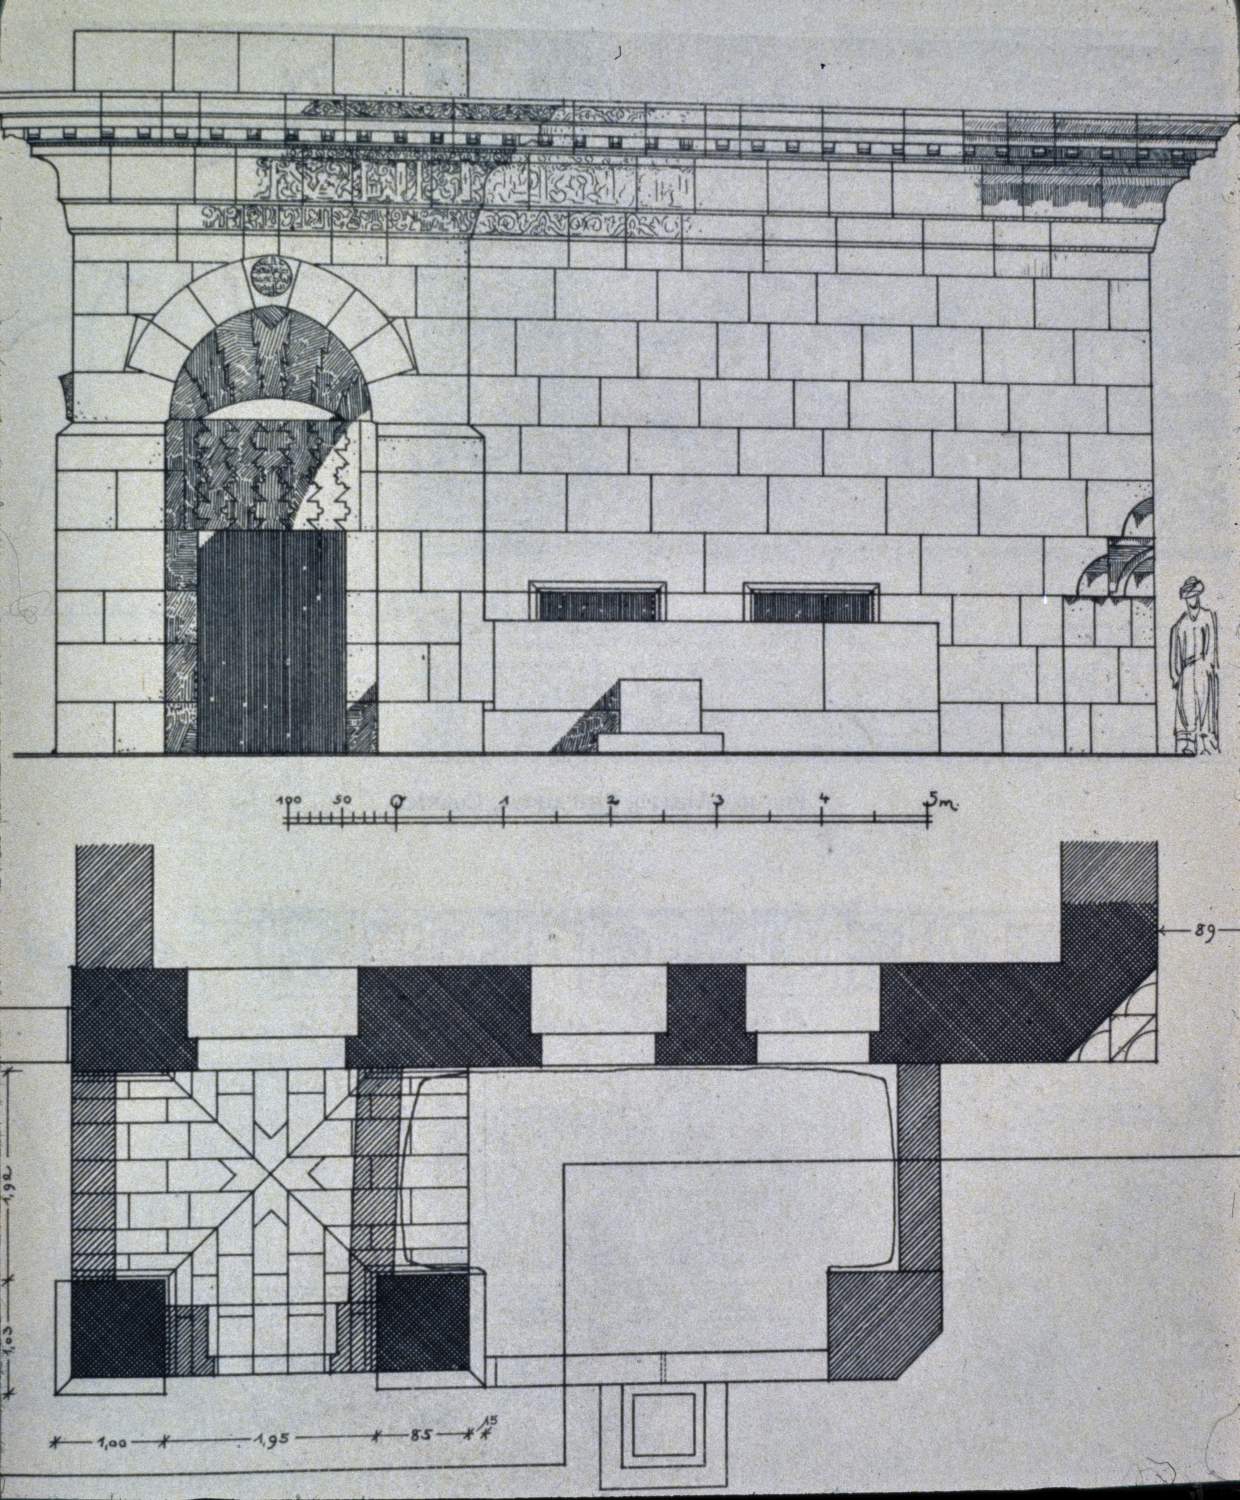 Elevation and plan of facade.